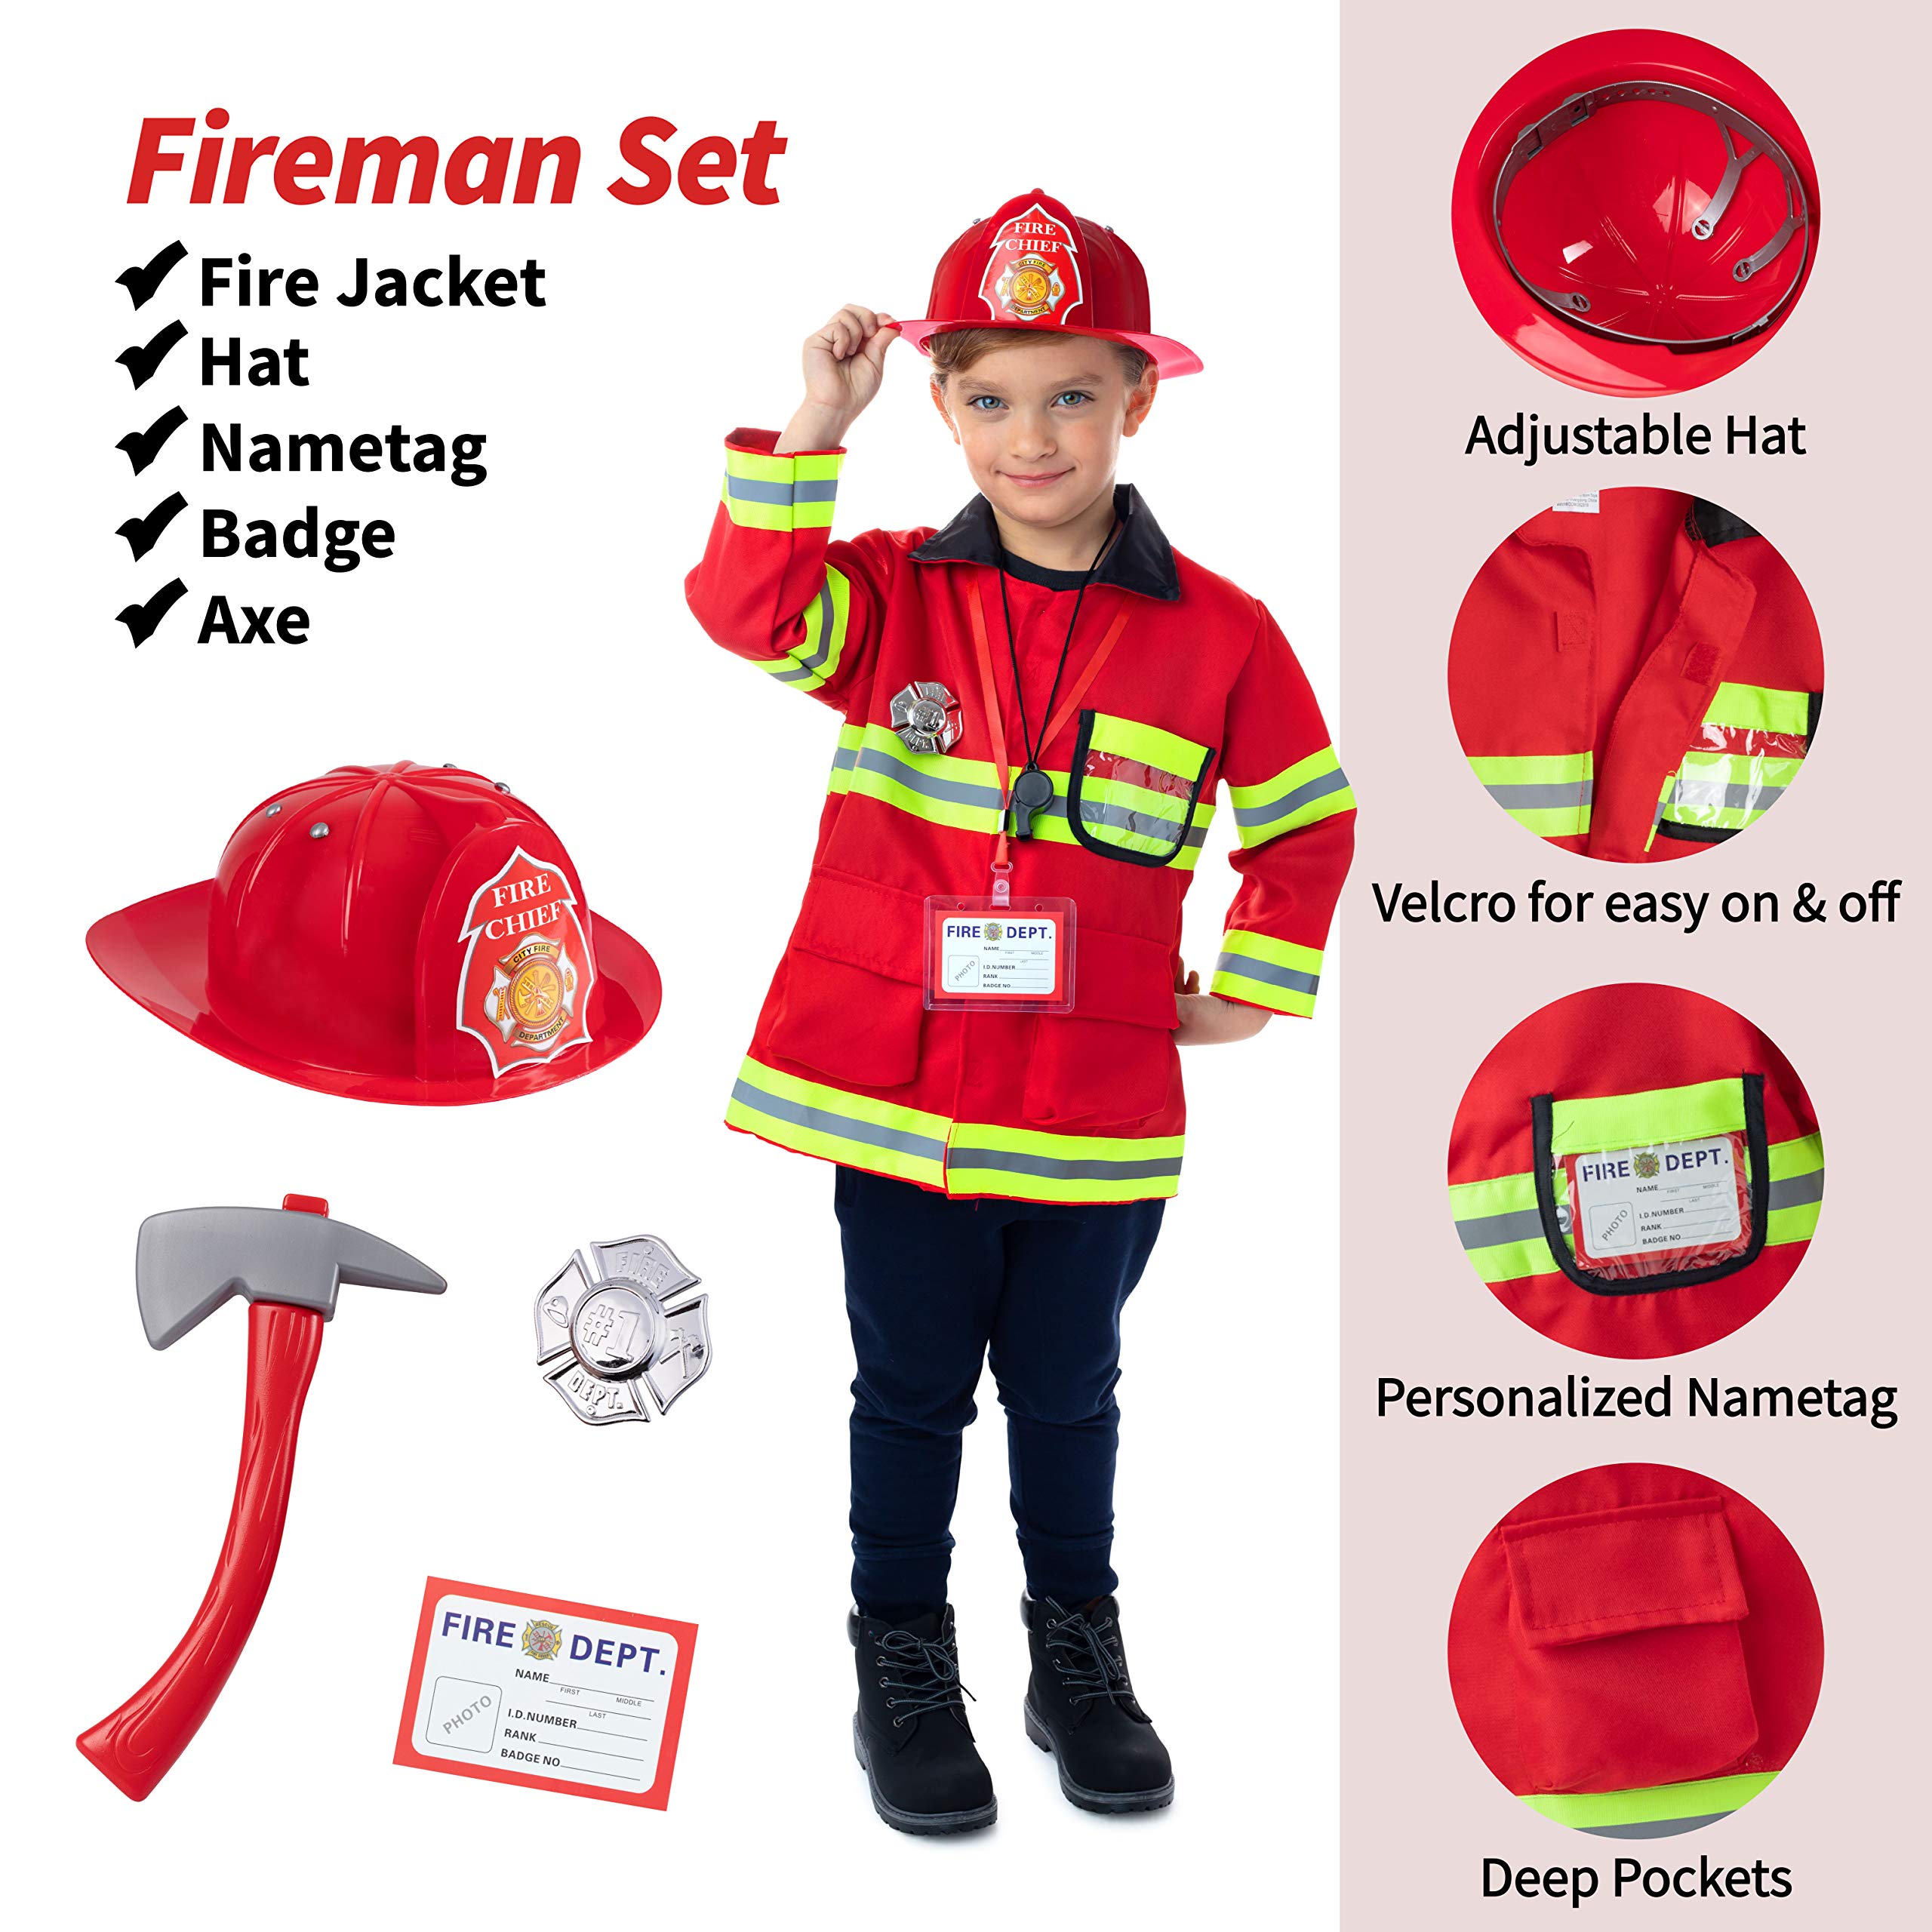 Born Toys Premium 16pcs Costume Dress up set for kids ages 3-7 fireman,police costume, and doctor all sets are washable and have accessories